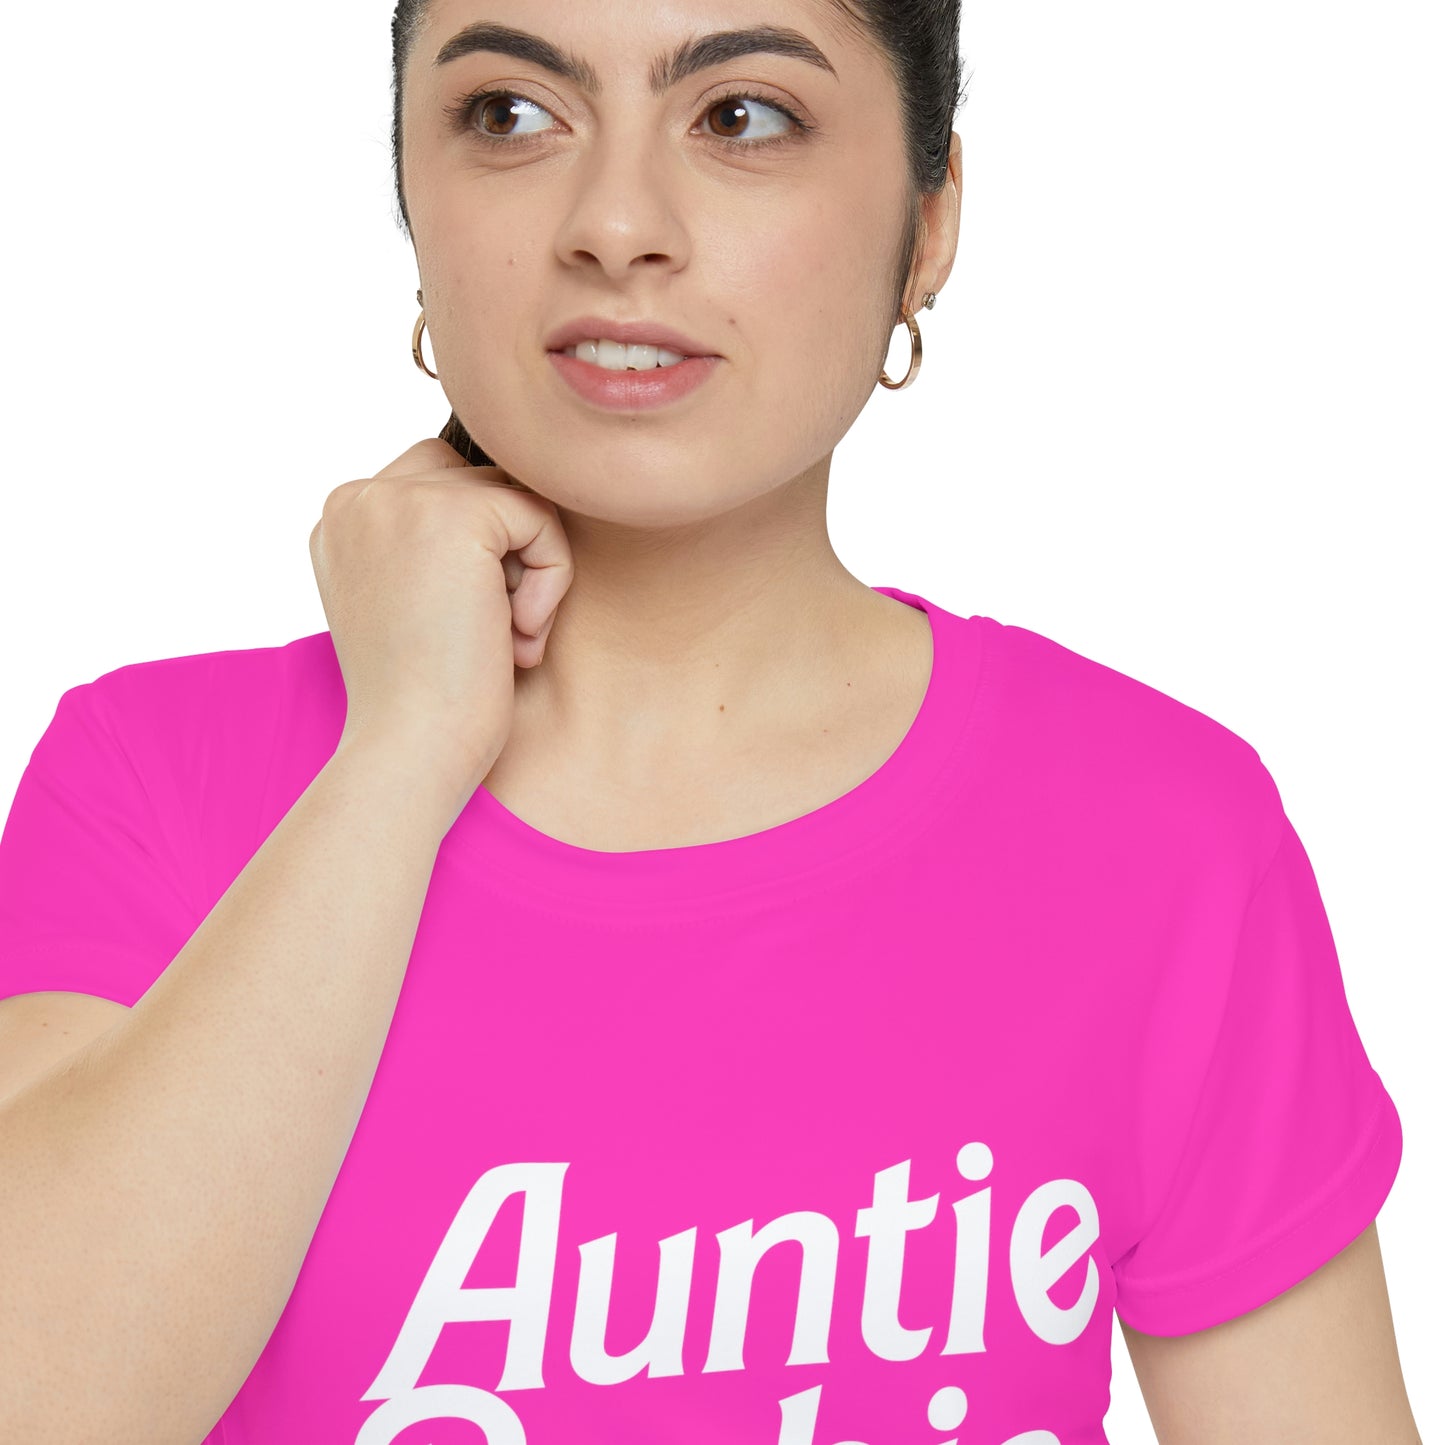 Auntie Barbie, Bachelorette Party Shirts, Bridesmaid Gifts, Here comes the Party Tees, Group Party Favor Shirts, Bridal Party Shirt for women